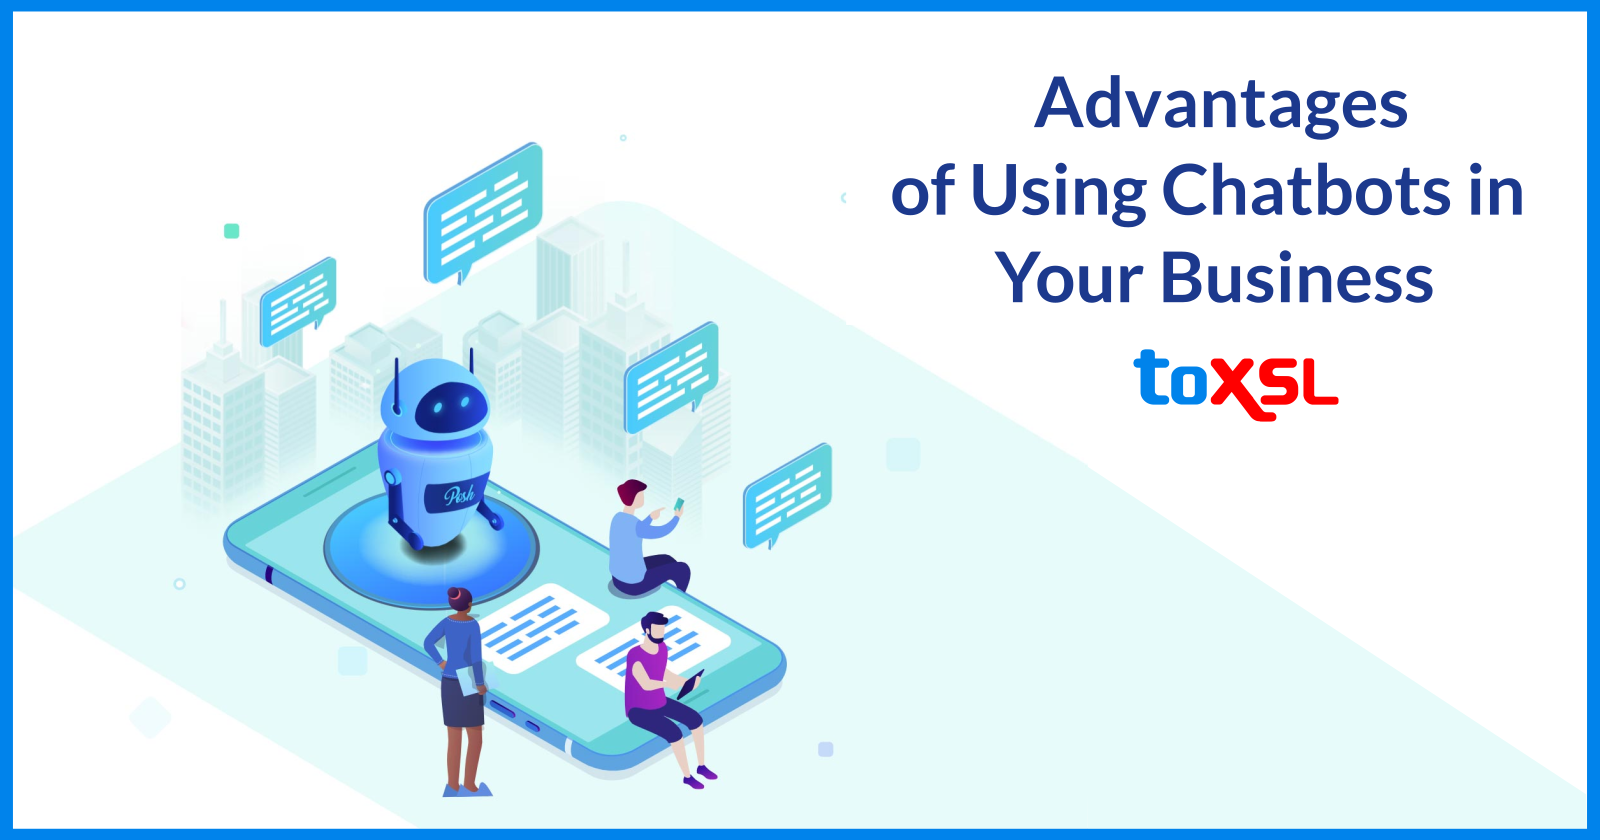 Top 6 Advantages of Using Chatbots in Your Business